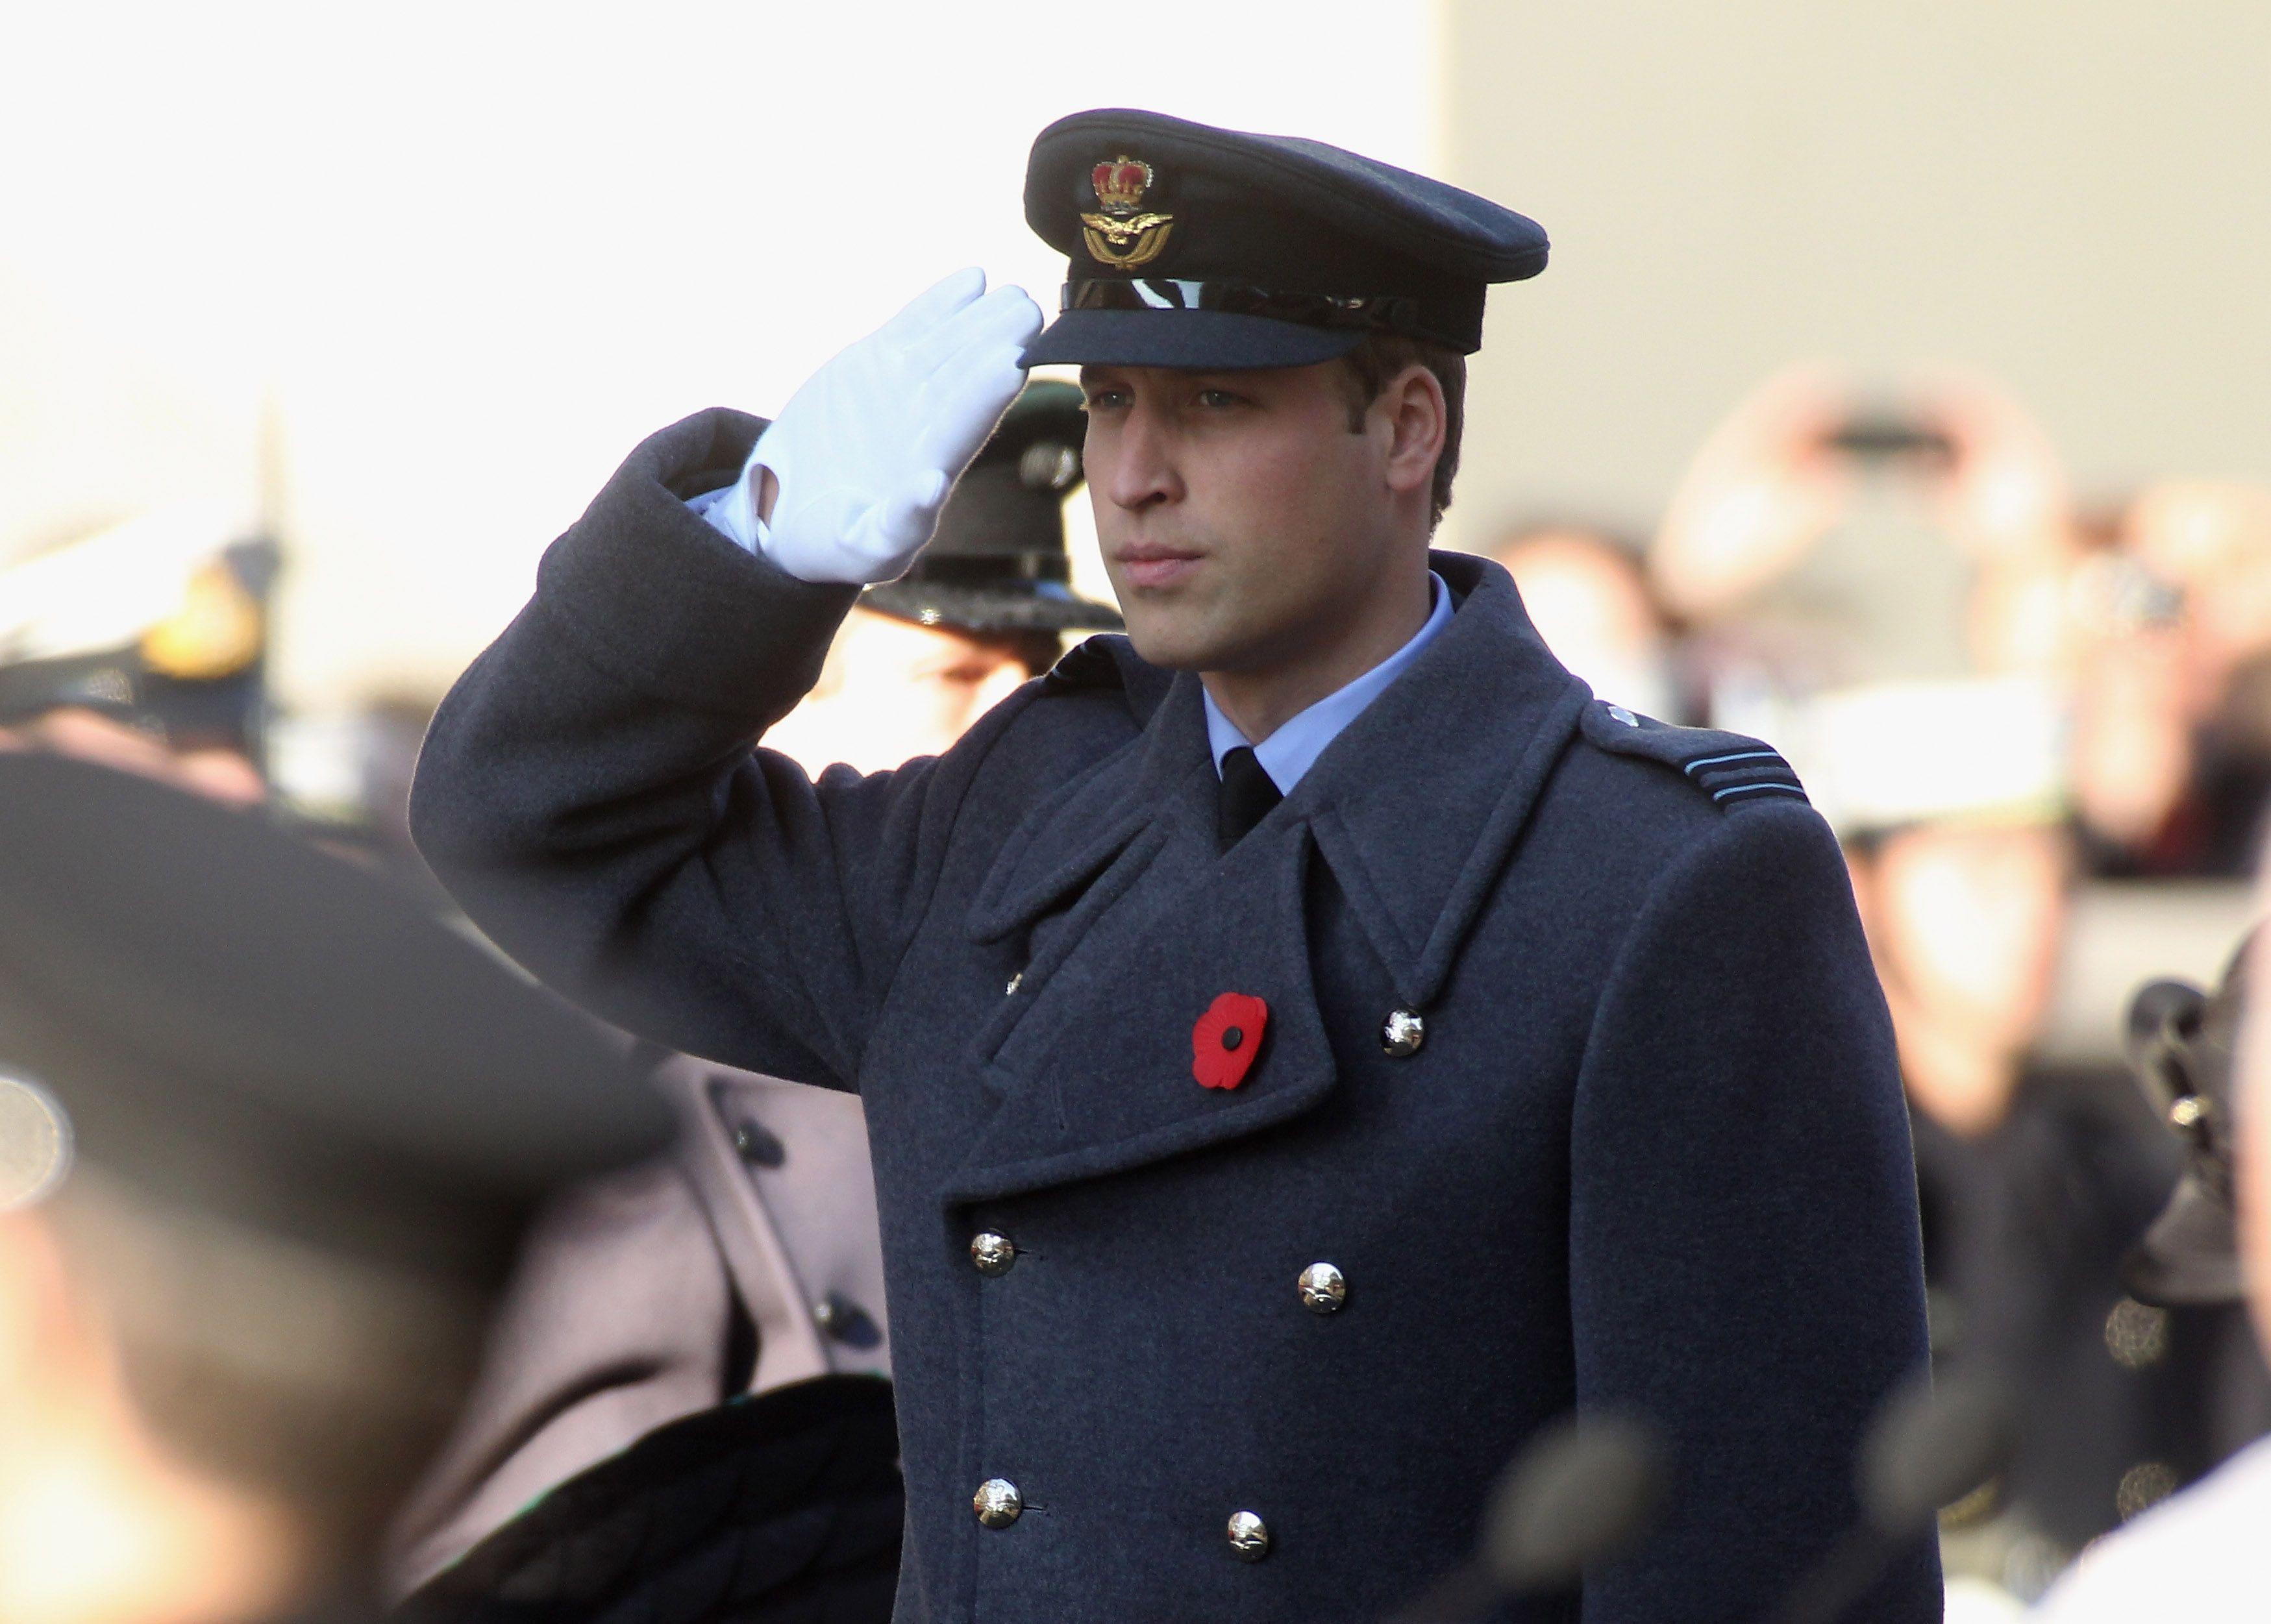 Prince William Wallpaper Image Photo Picture Background